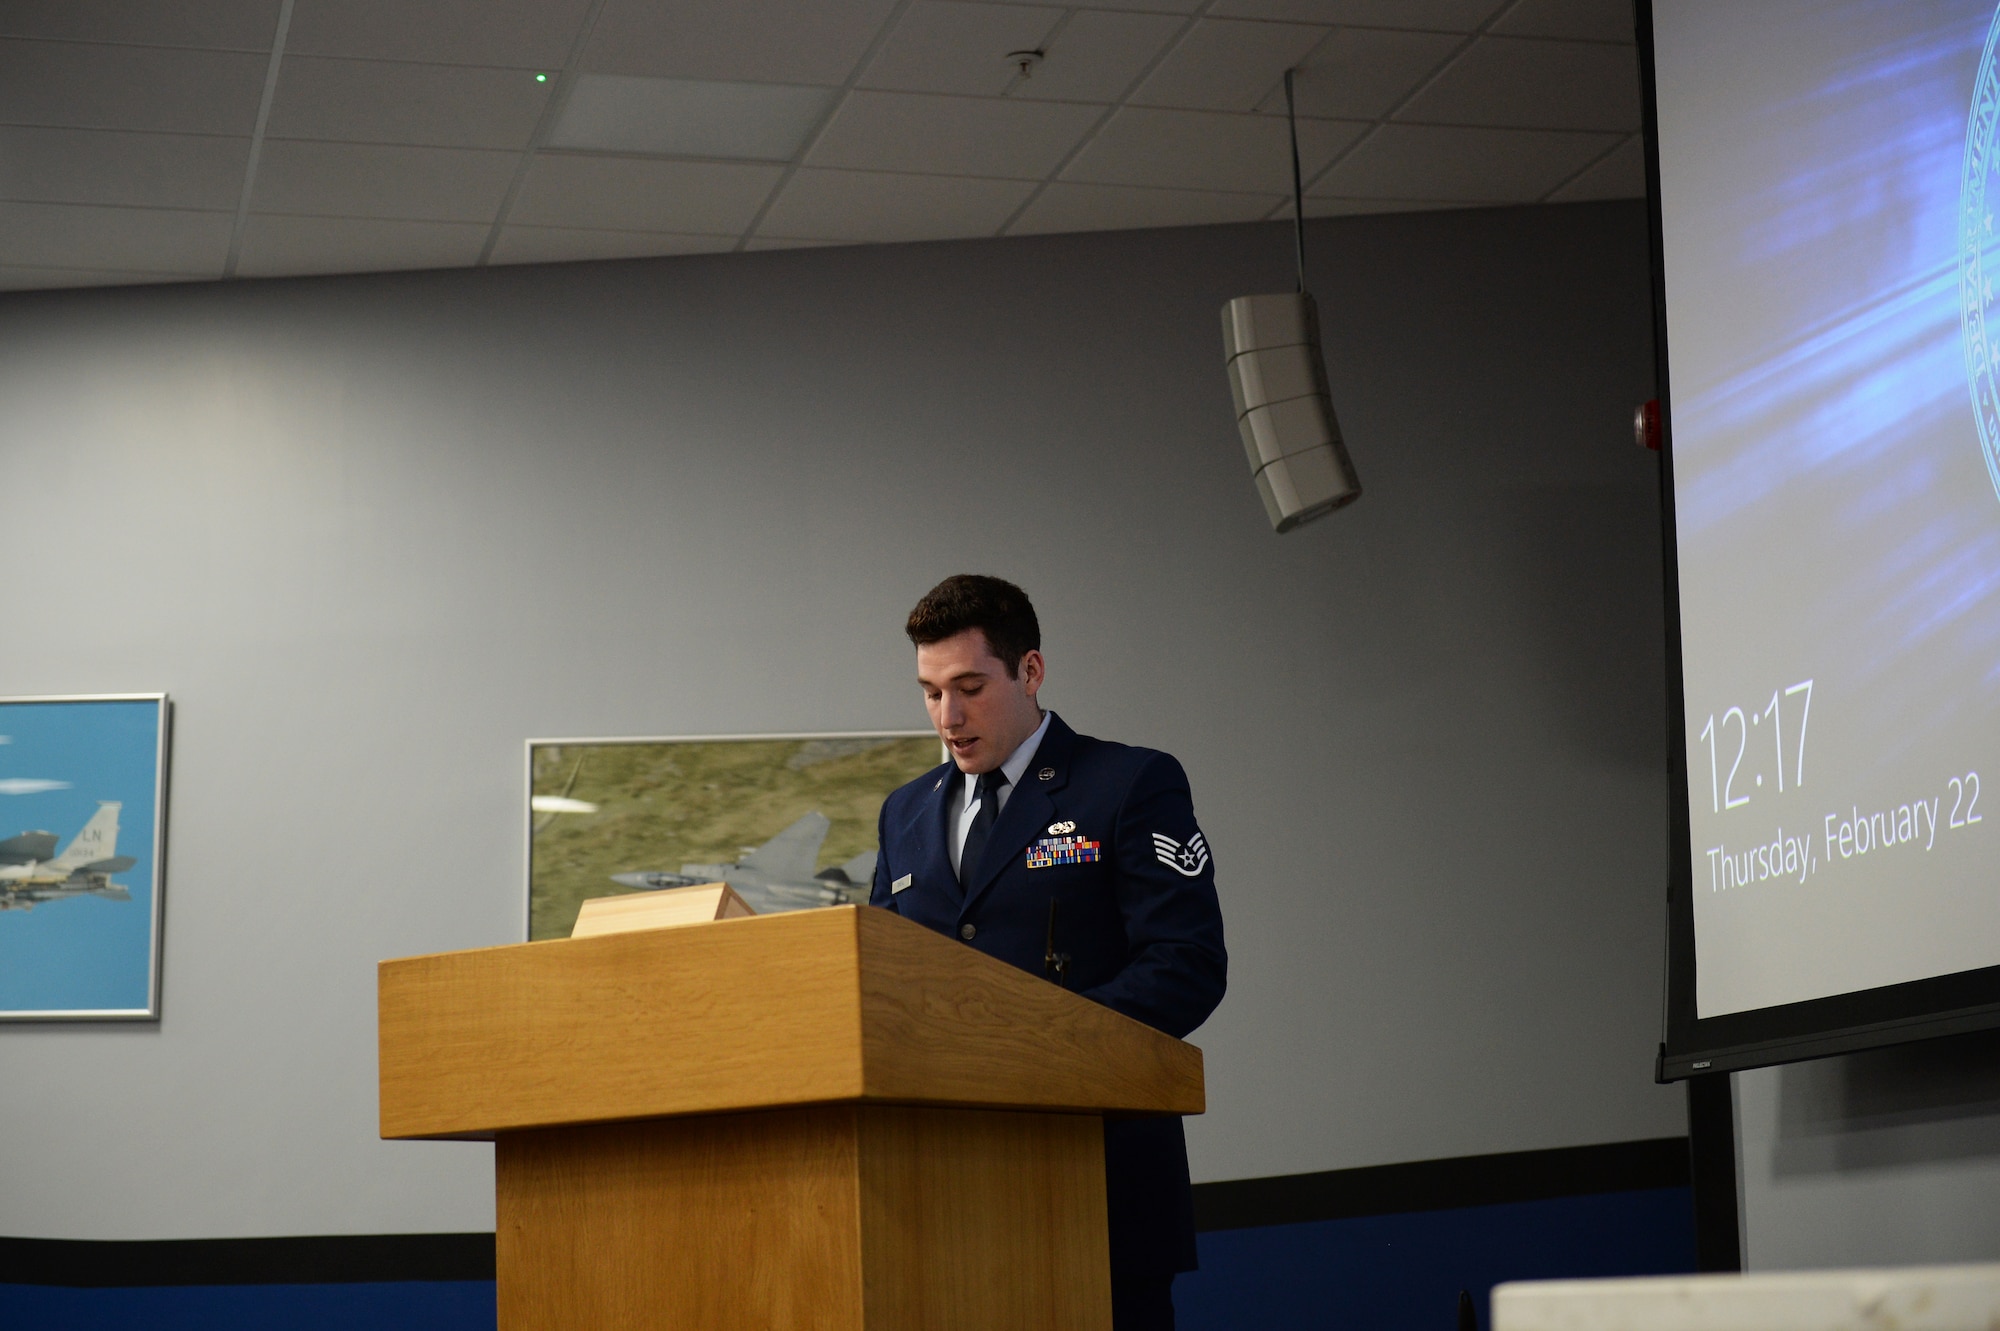 (courtesy photo) An Airman playing the role of the victim, takes the stand during a mock trial at the Strike Eagle Complex at Royal Air Force Lakenheath, England, Feb. 22, 2018. The Airman delivered statements of the damaging psychological effects he suffered as a result of being violated. (U.S. Air Force photo/Airman 1st Class Shanice Williams-Jones)